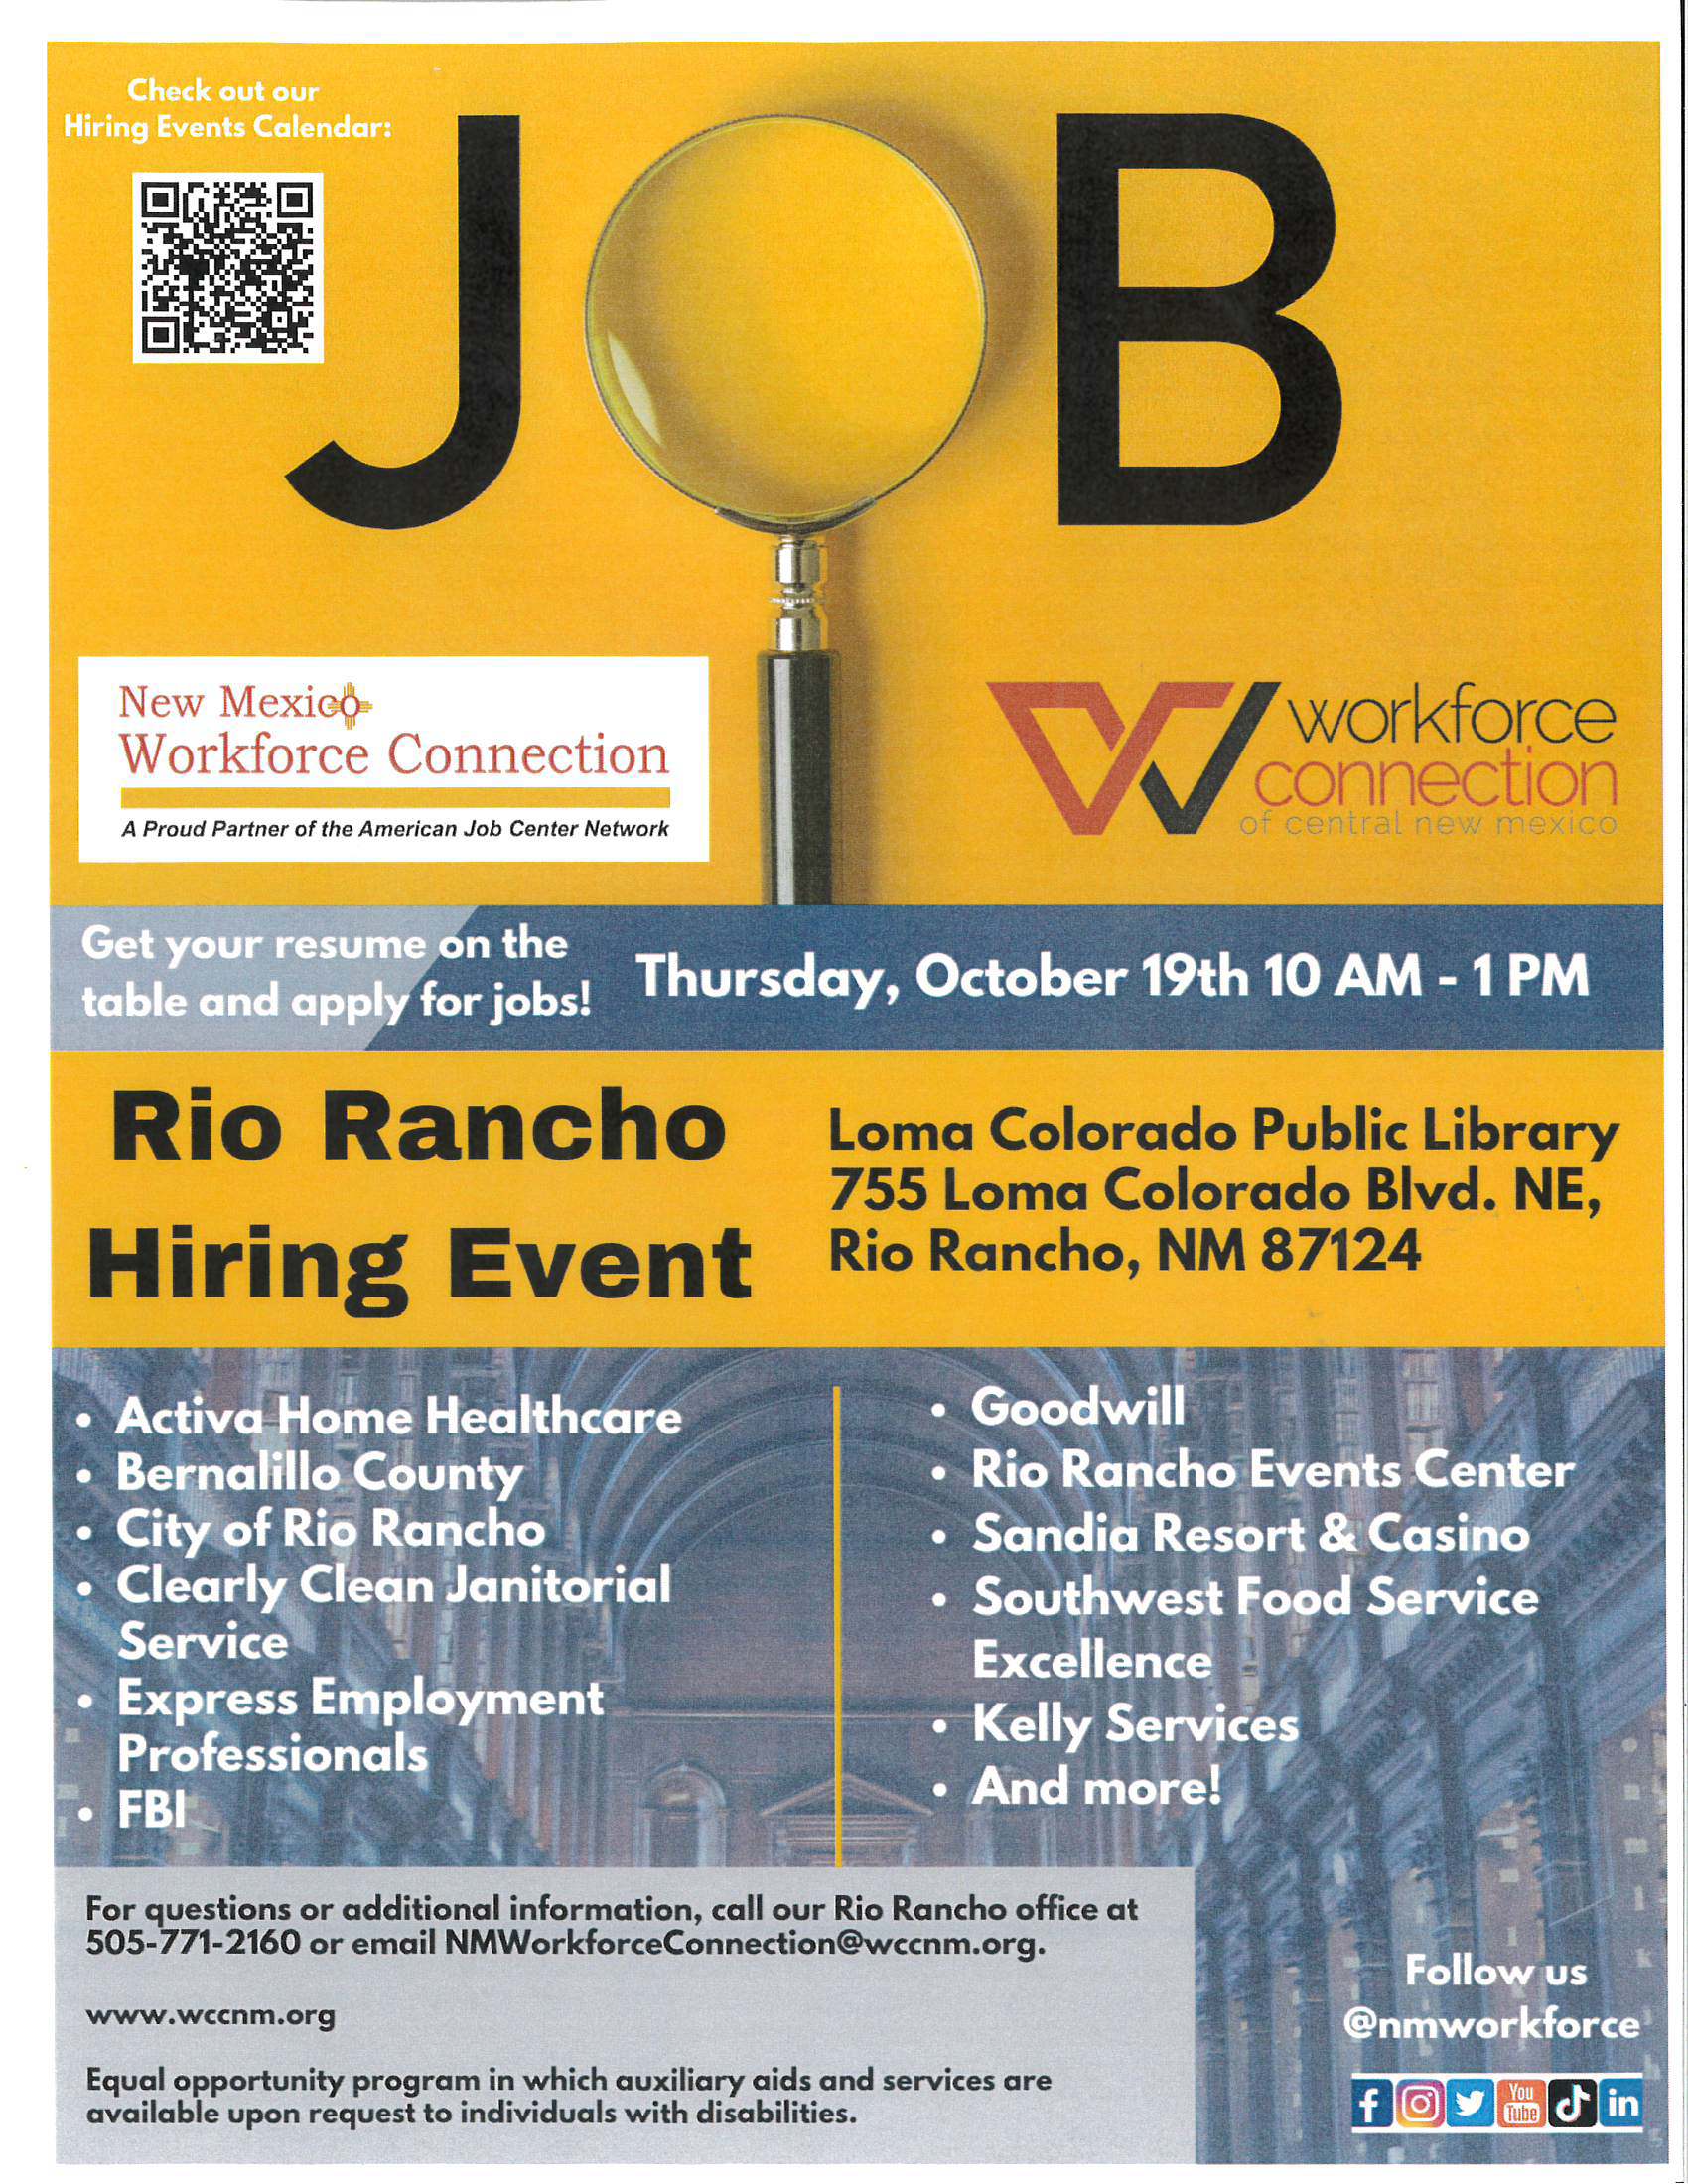 Job Fair Workforce Connection of Central New Mexico flyerw